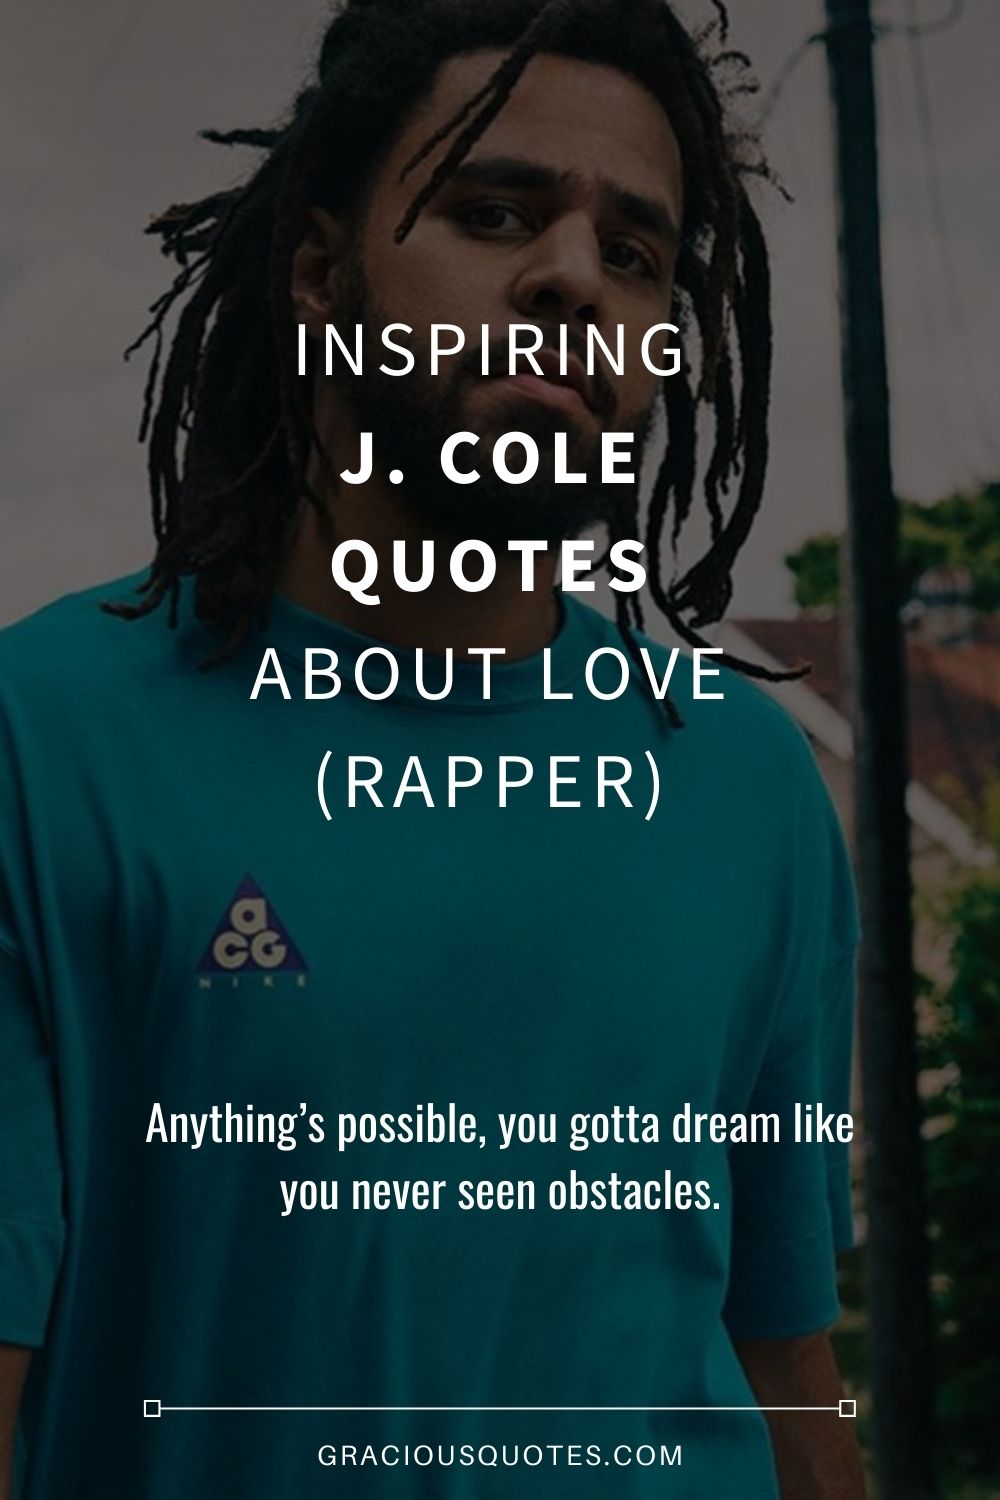 DO YOU LIKE ME? in 2023  Inspirational rap quotes, Rap quotes, Cool lyrics